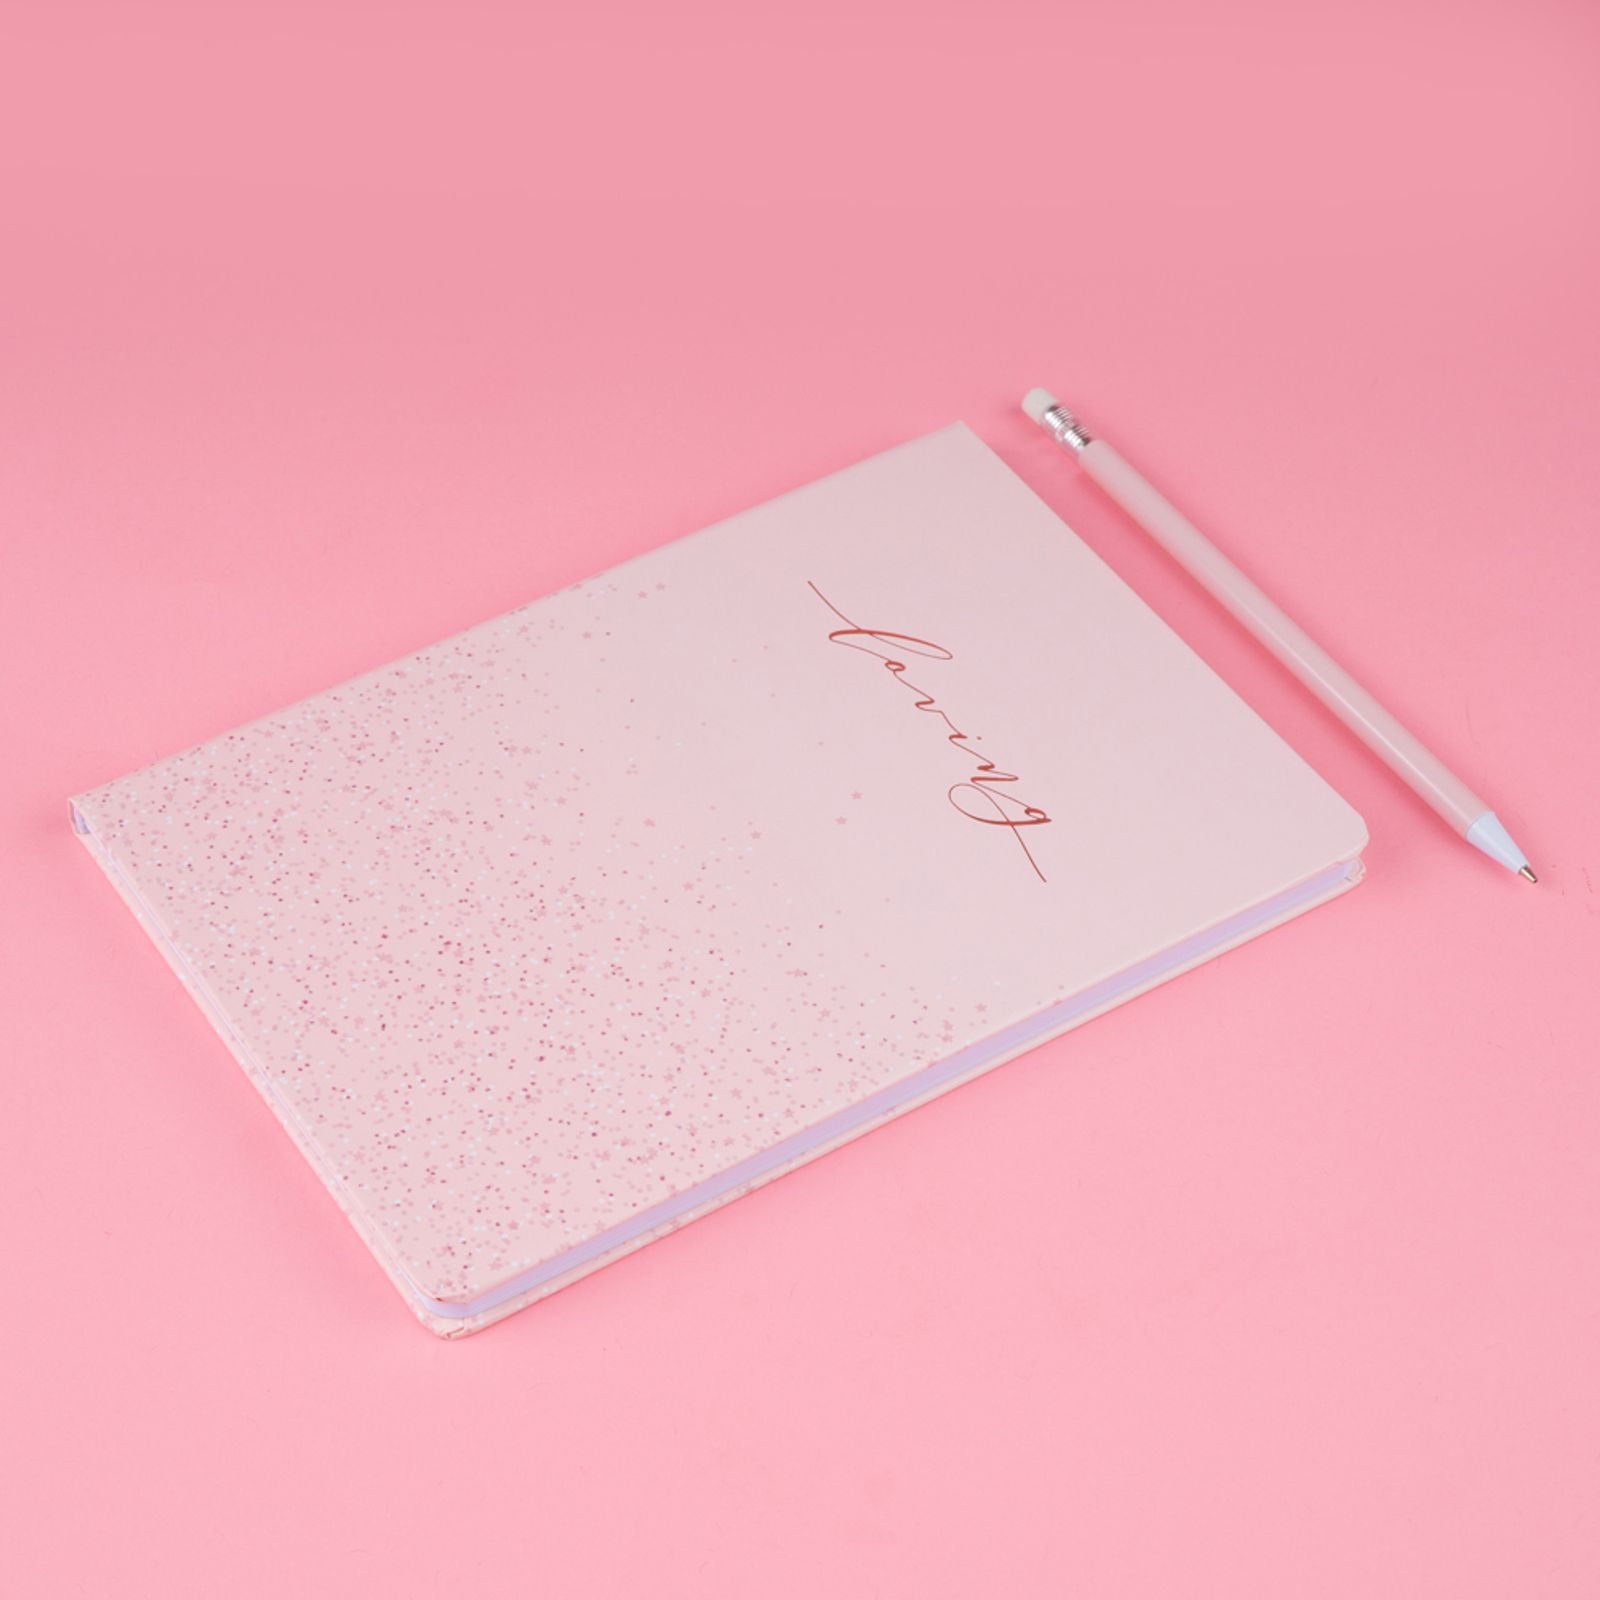 MINISO ROSE GOLD SERIES A5 DUSTED HARDCOVER BOOK ( 80 SHEETS ) PDQ 2015285310100 STATIONERY & GIFT